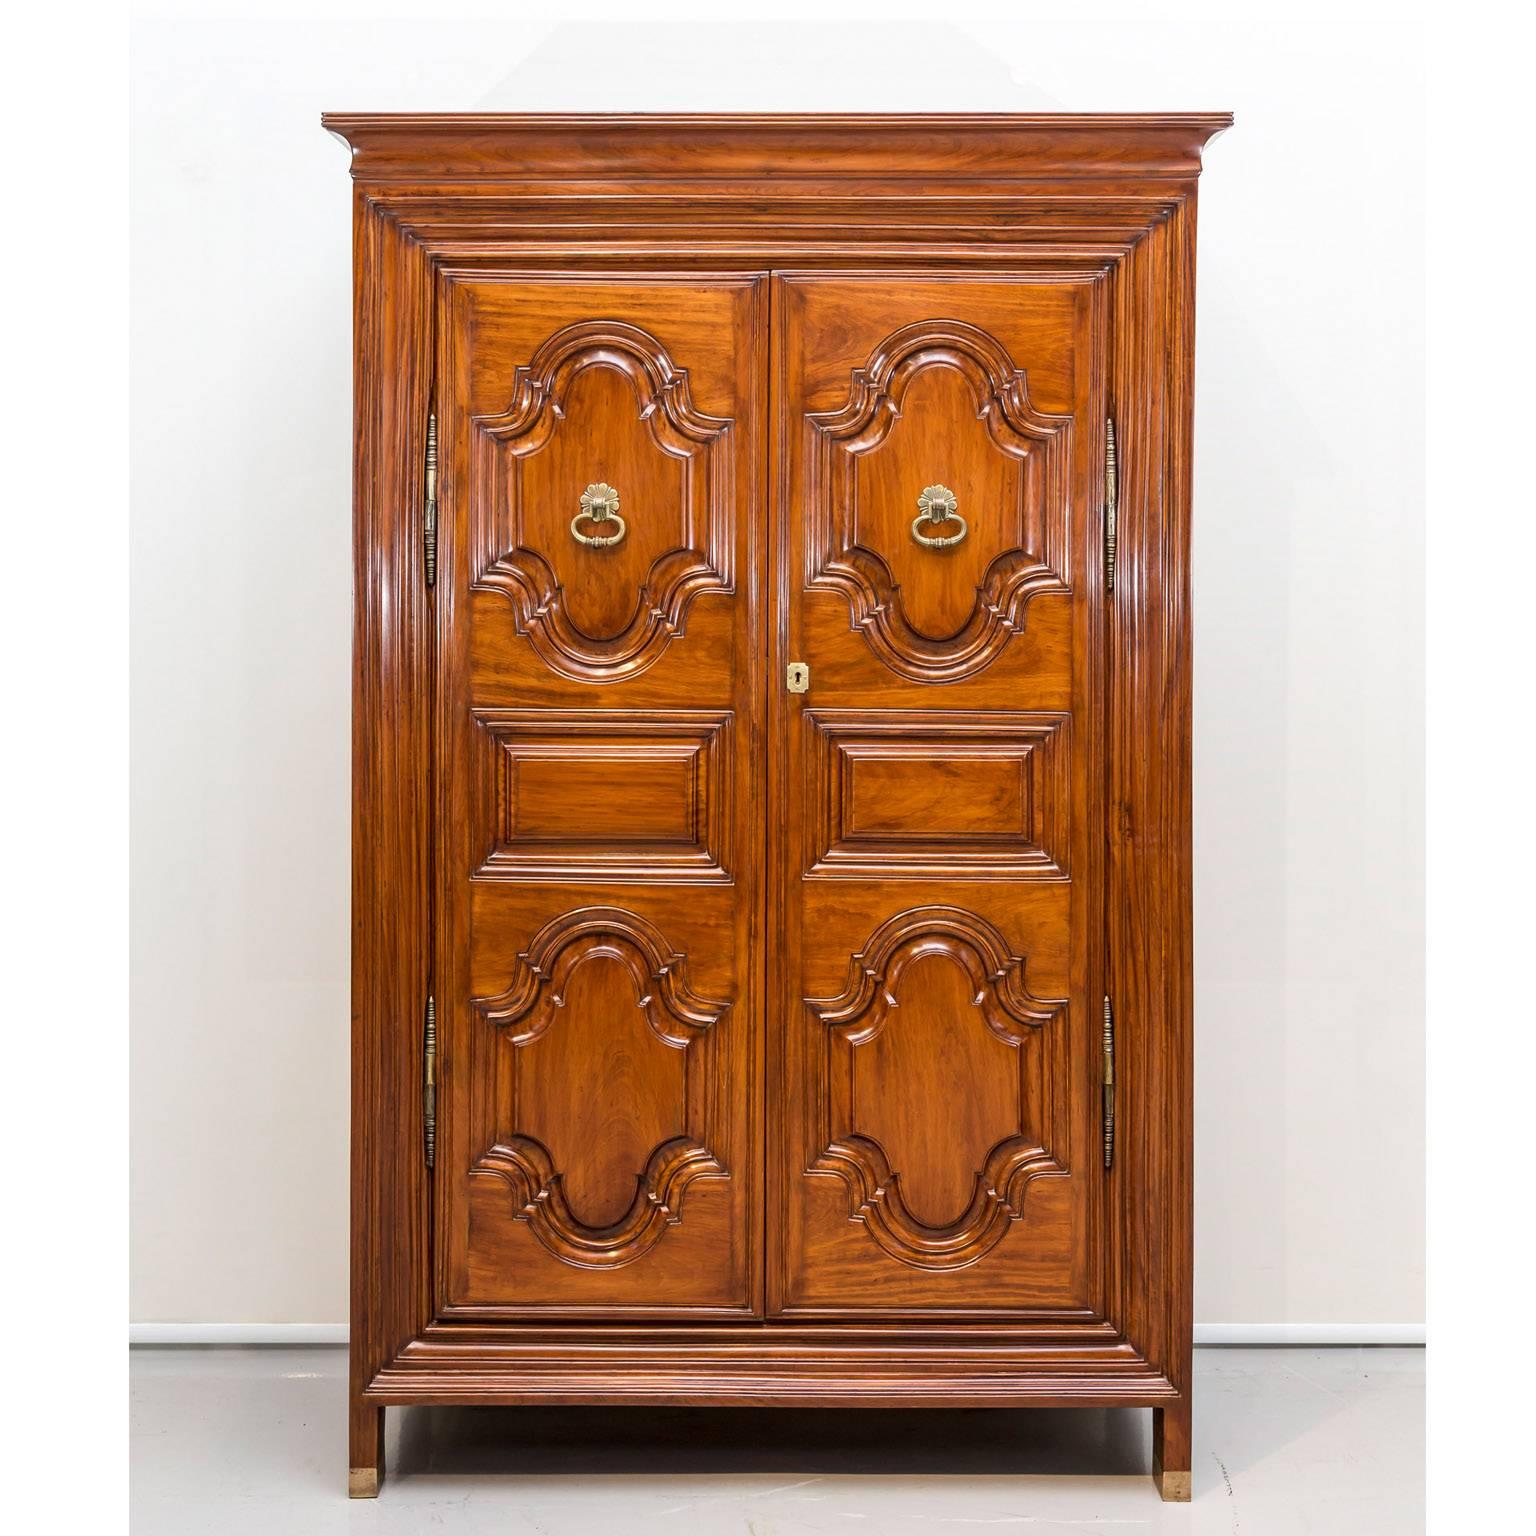 A unique Dutch colonial satinwood cupboard with a flaring cornice above a short frieze. The double doors are constructed with raised panels and feature decorative brass handles and unusual style hinges. 
Inside are two removable shelves.
The